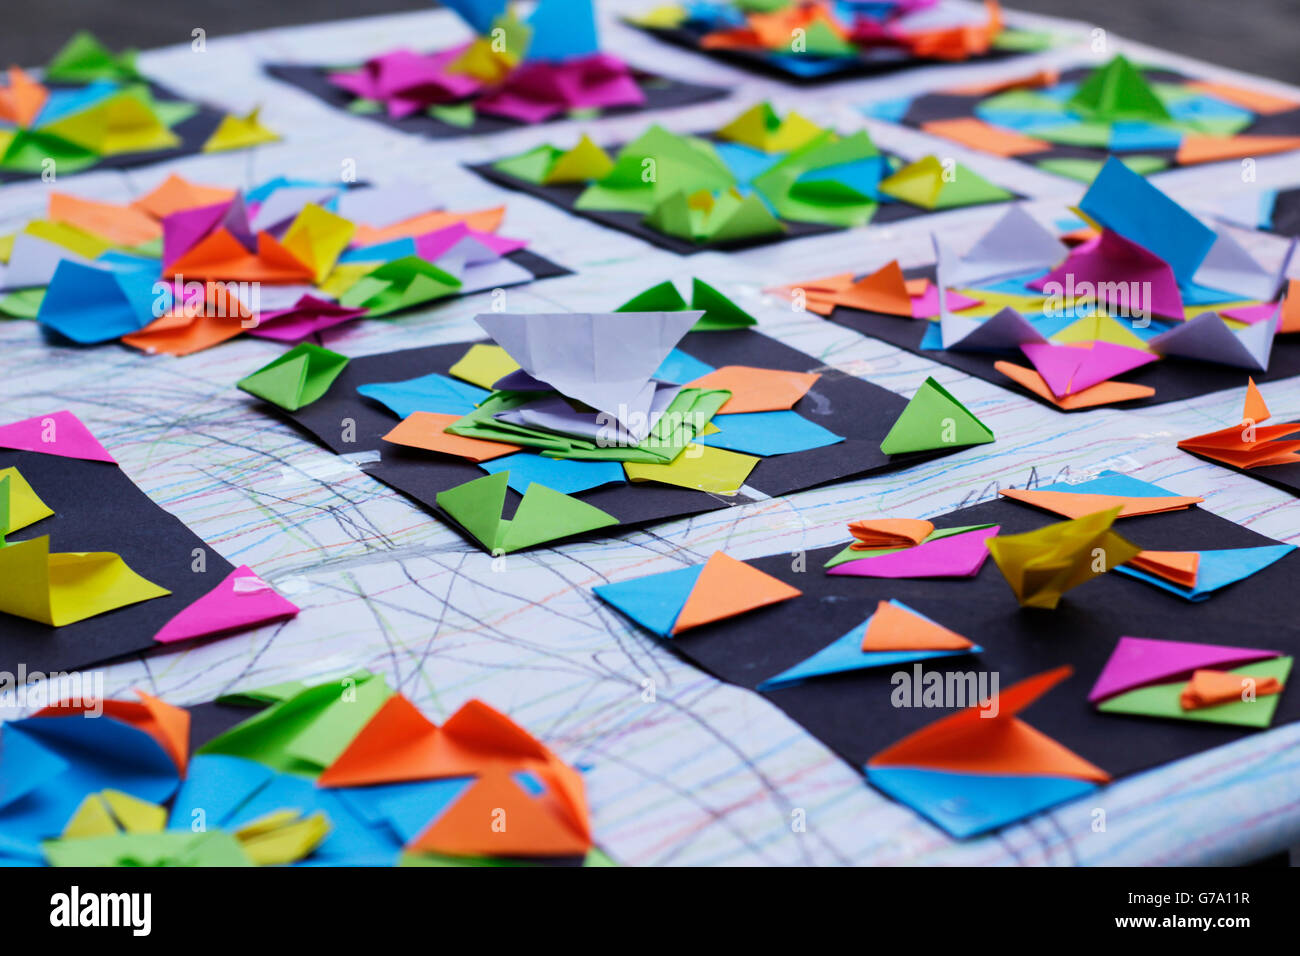 Photograph of some colorful geometric paper origamis Stock Photo